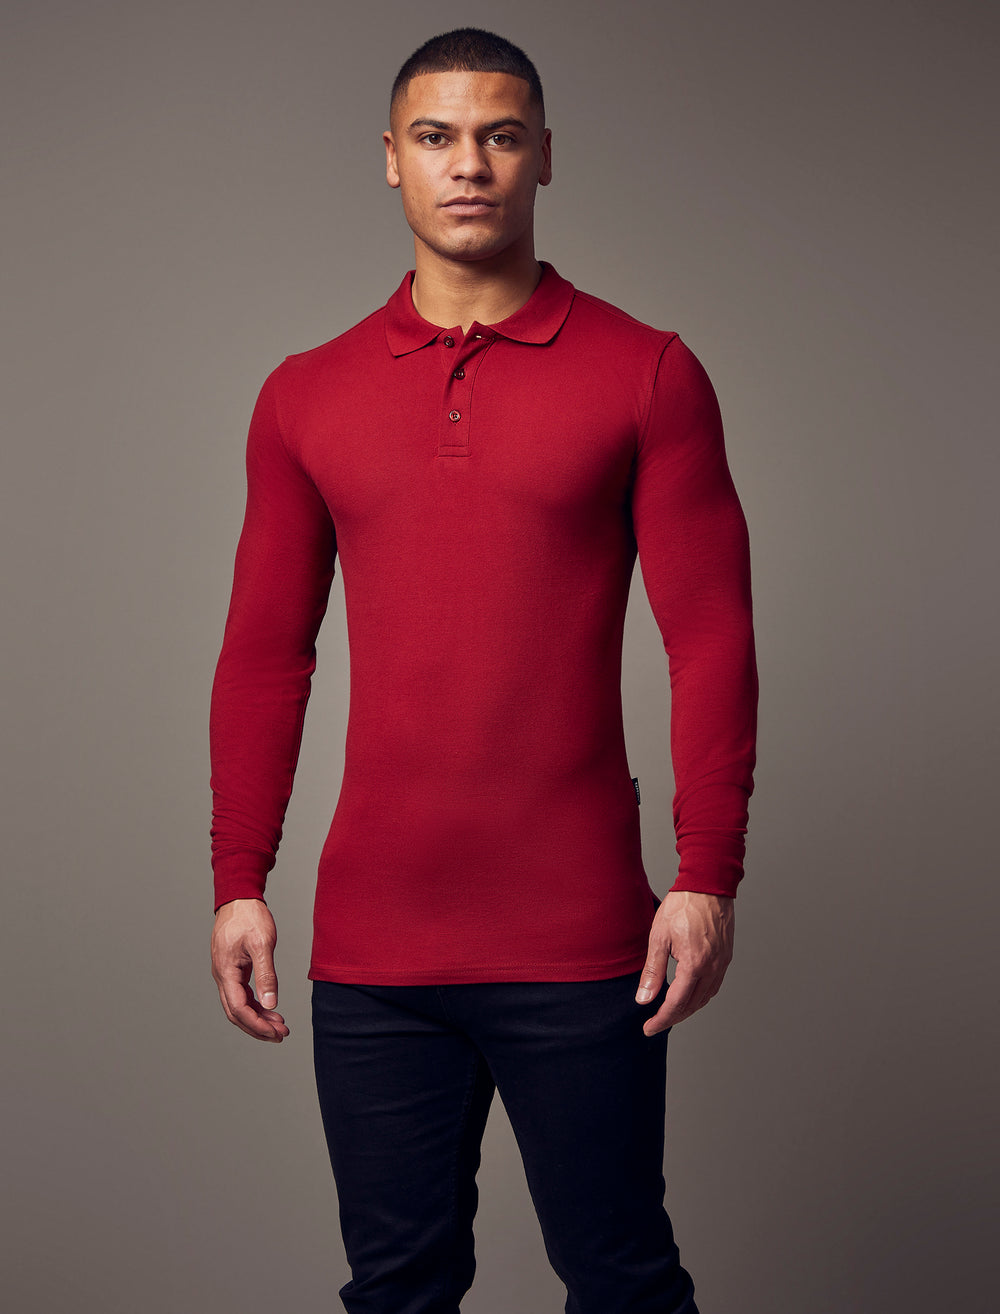 burgundy tapered fit polo shirt by Tapered Menswear, showcasing the muscle fit design for a refined and comfortable silhouette